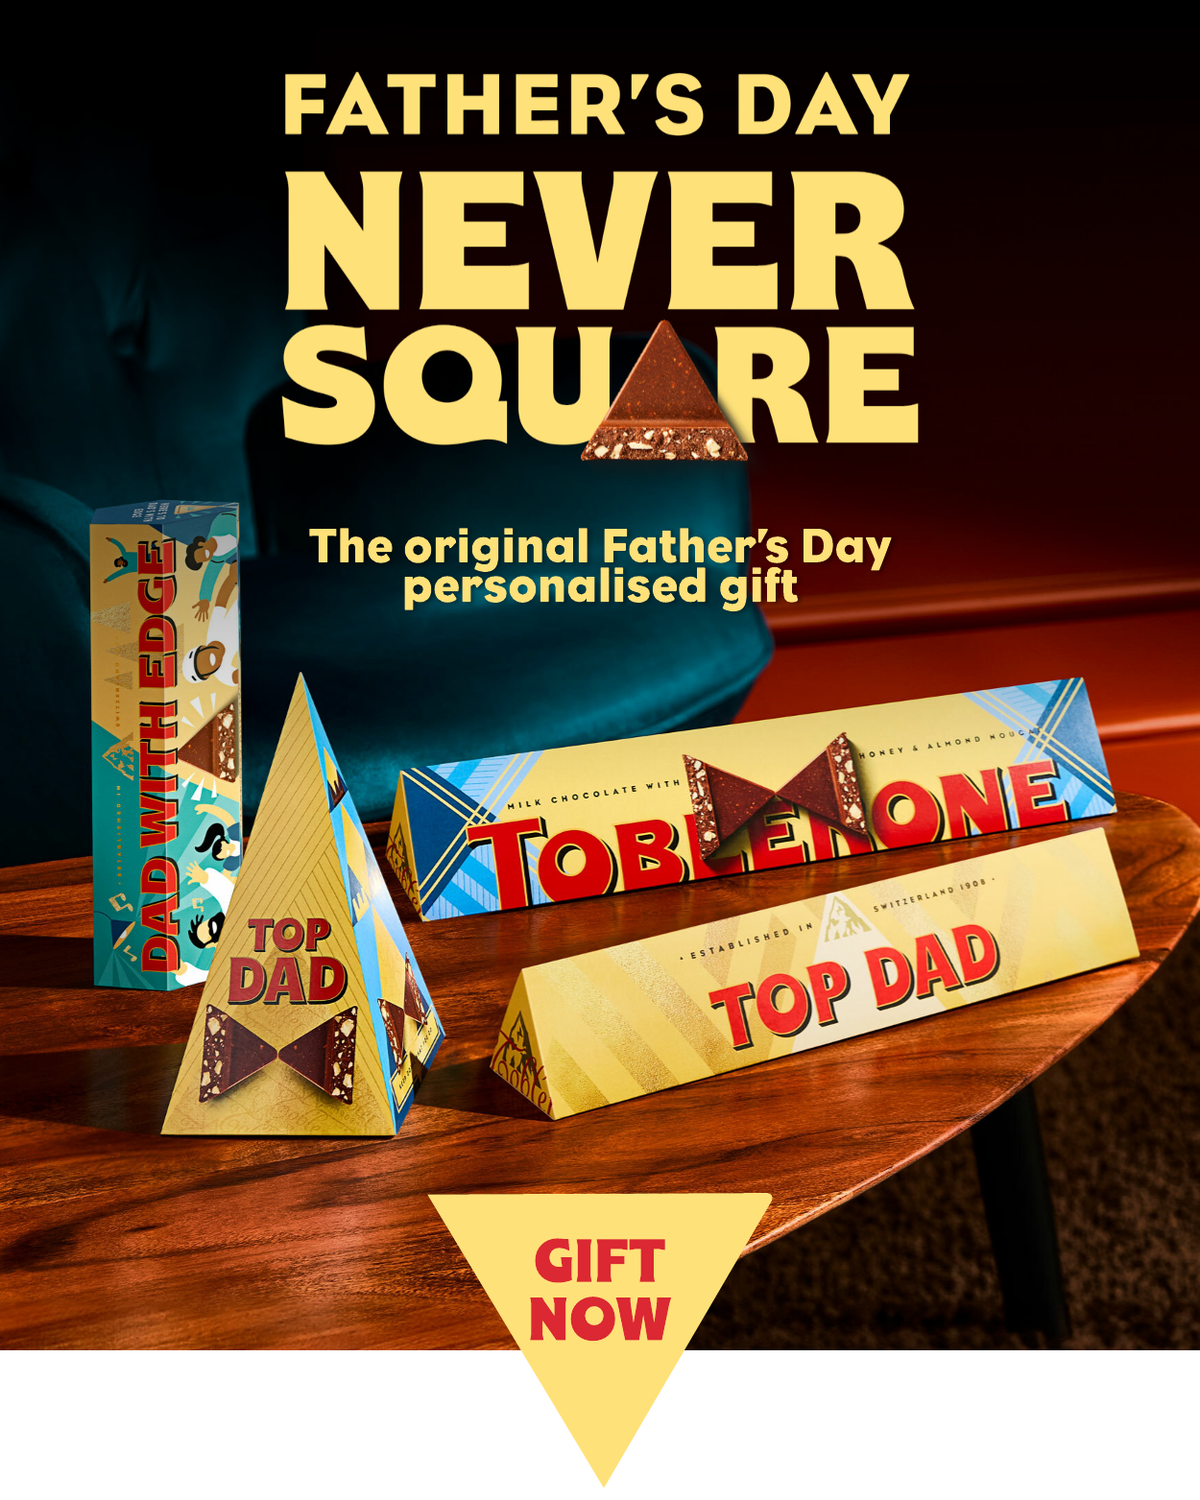 The original Father's Day personalised gift